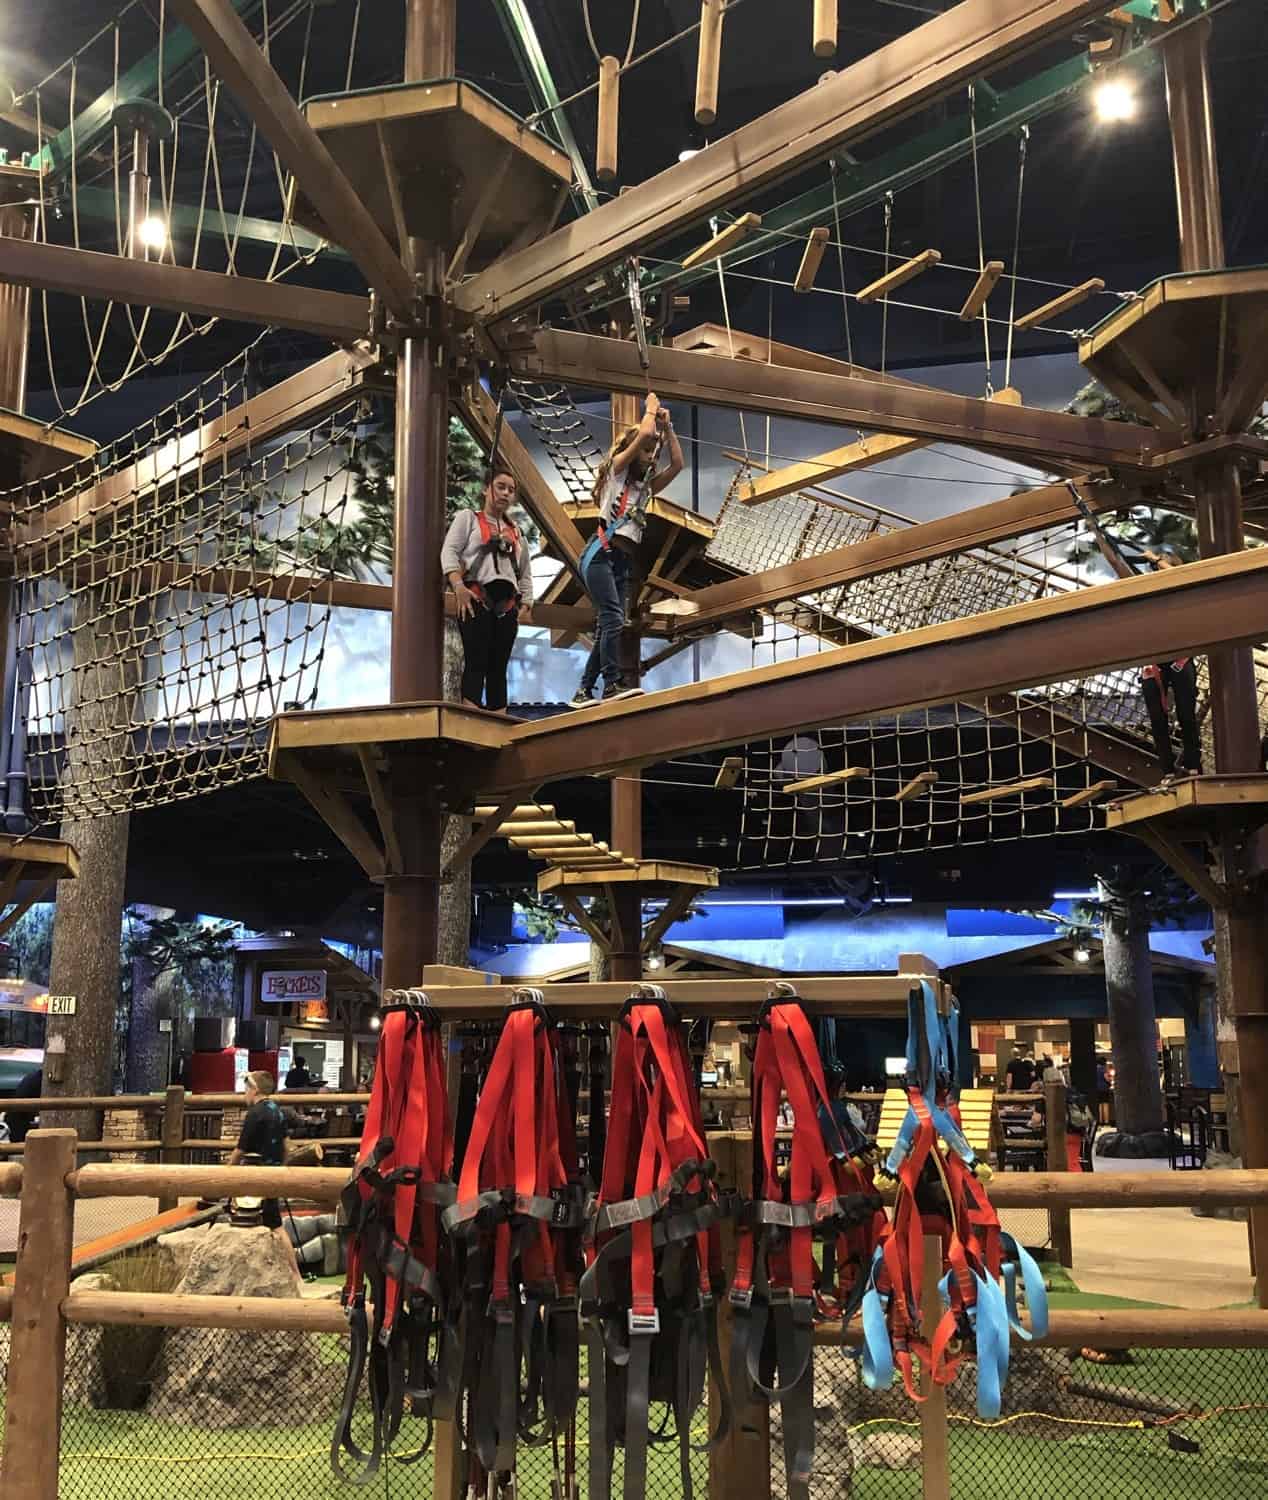 Climbing Harnesses Howlers Peak Ropes Course Great Wolf Lodge Arizona